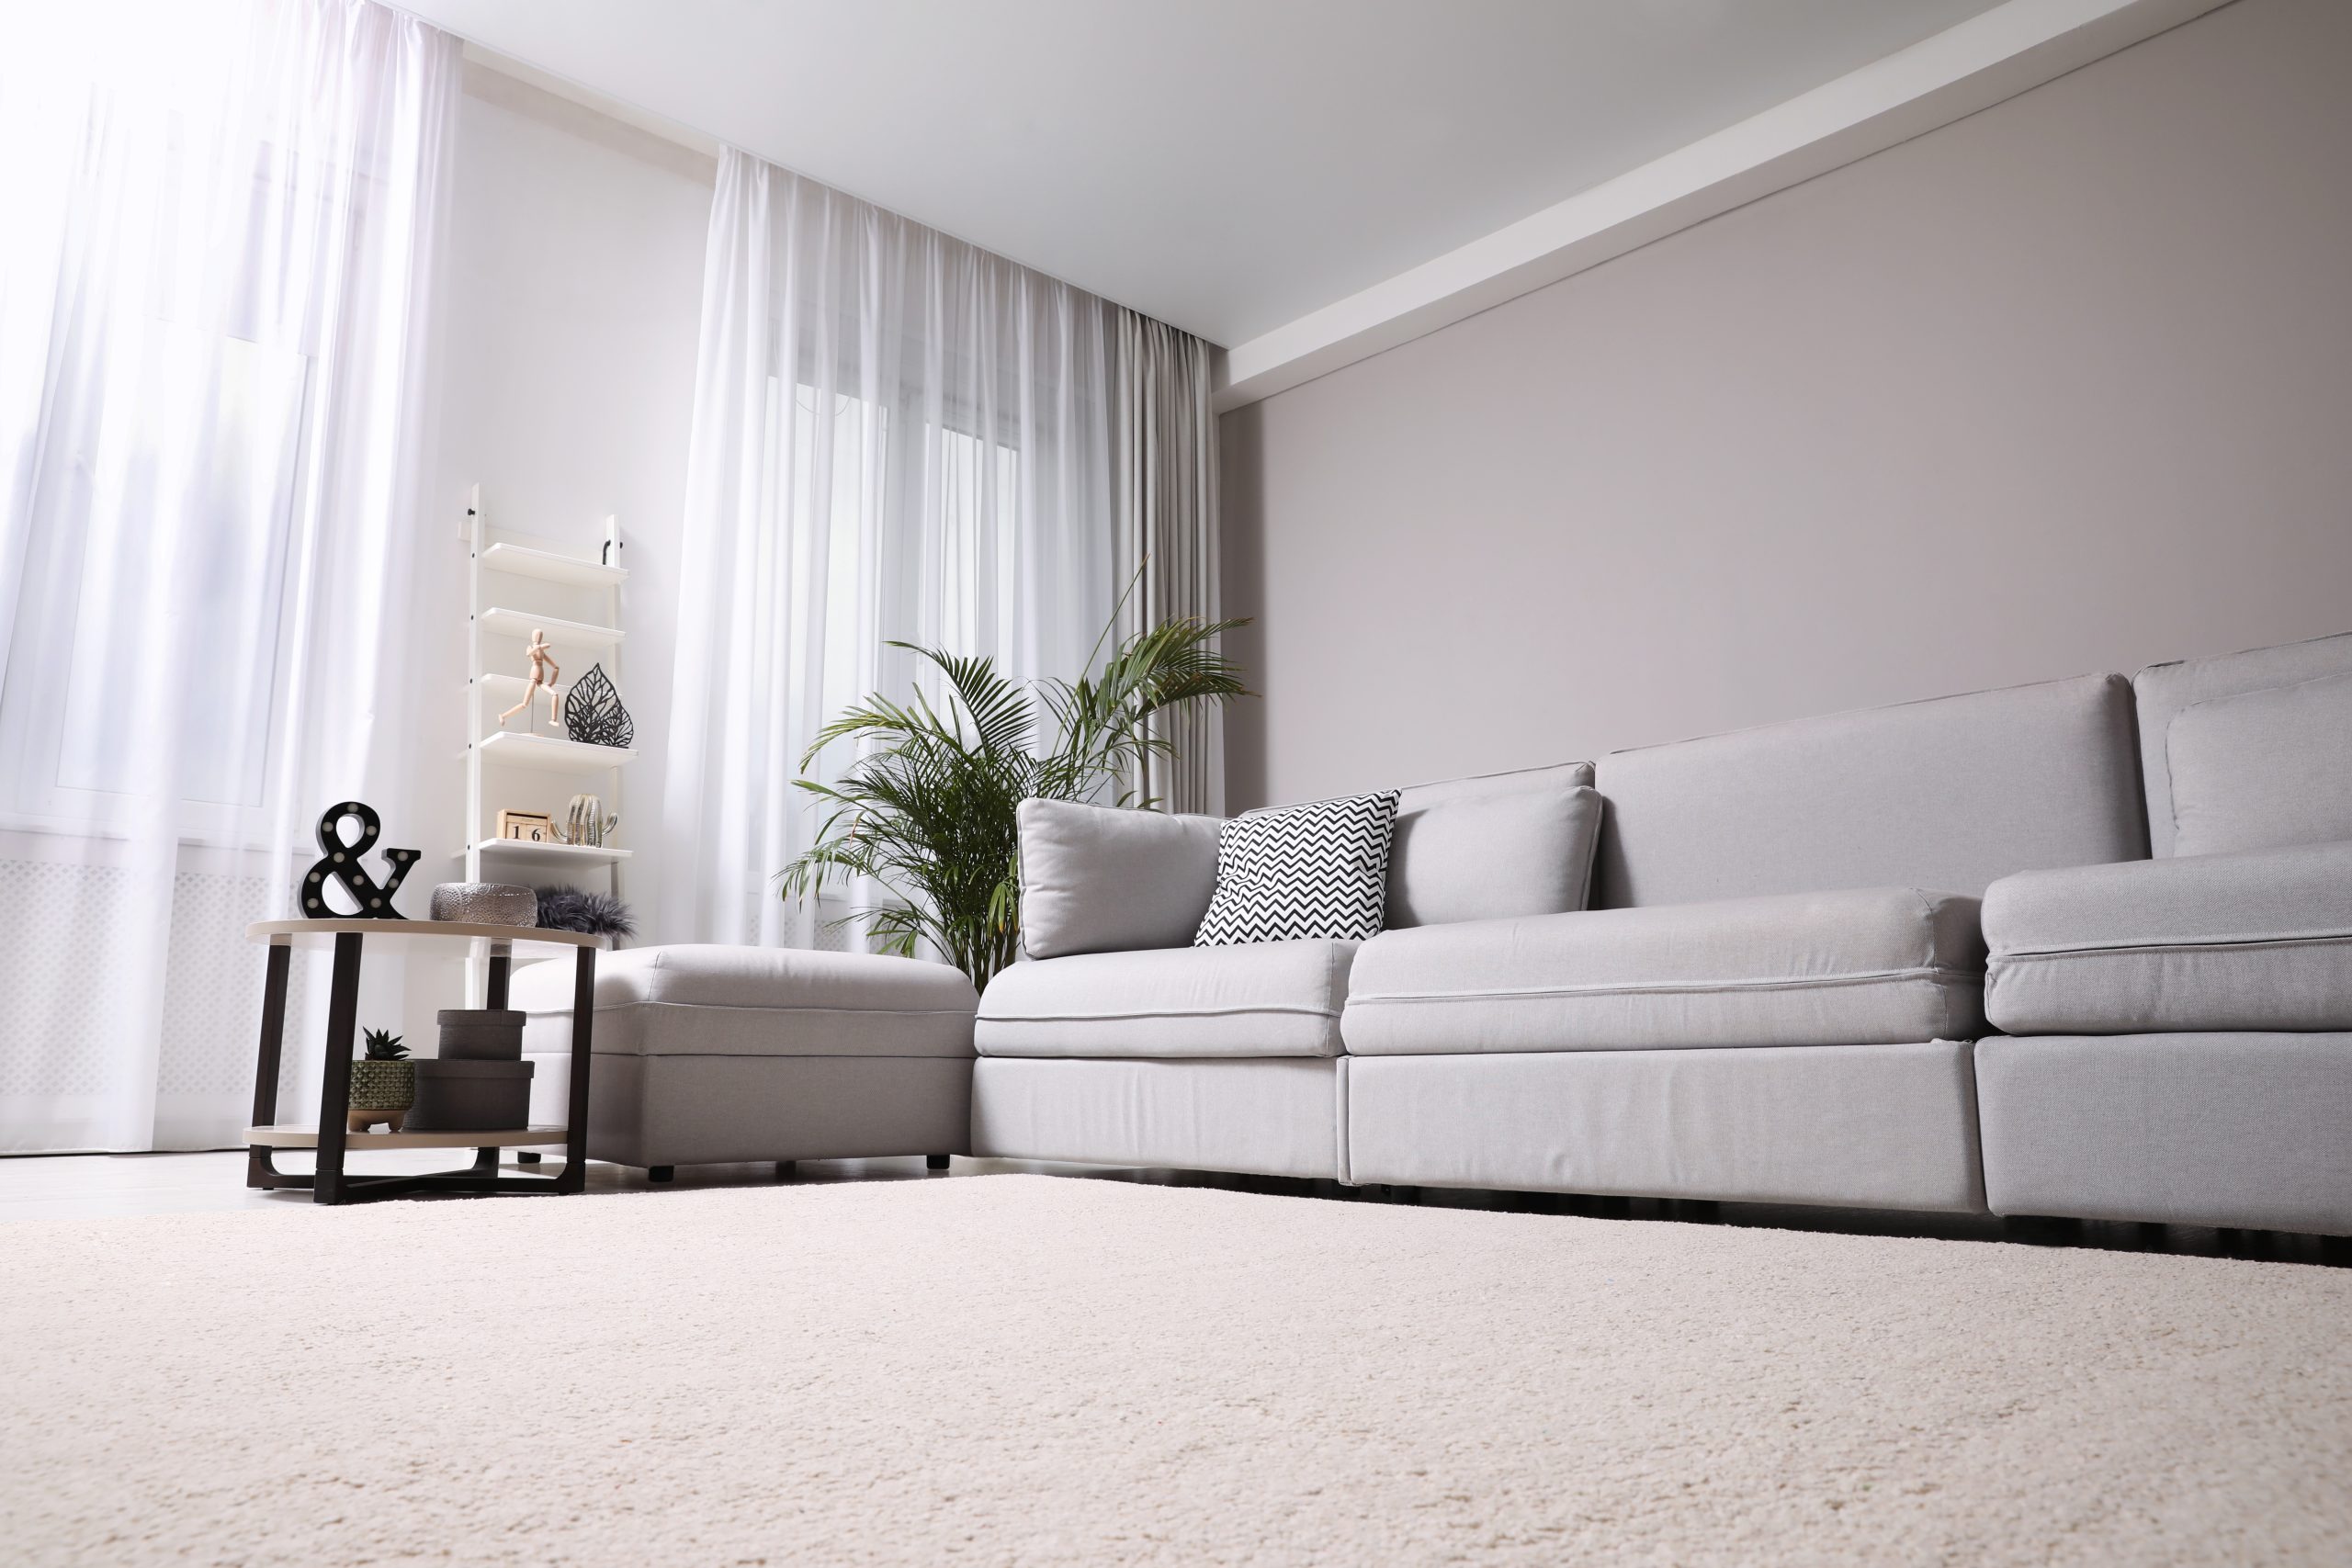 Living,Room,Interior,With,Soft,Carpet,And,Stylish,Furniture